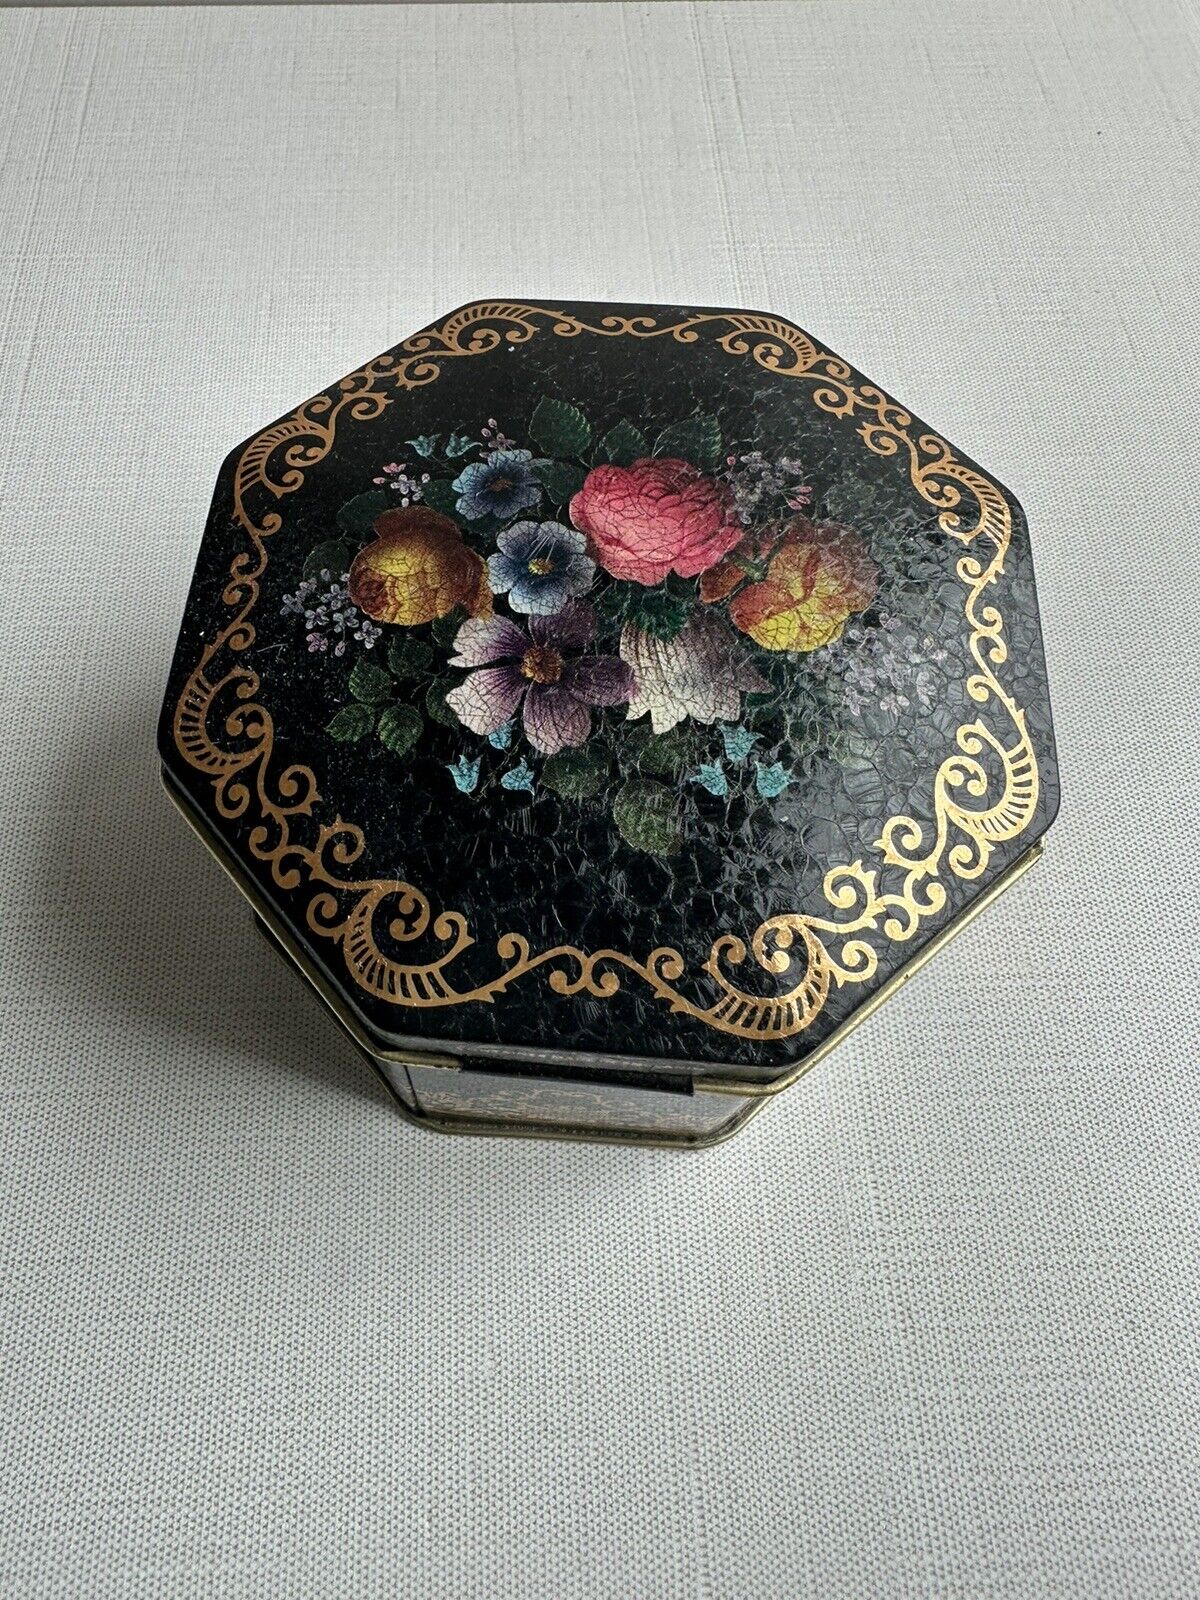 Vintage Black English Rose Floral and Gold Scroll Candy Tea Tin made in England